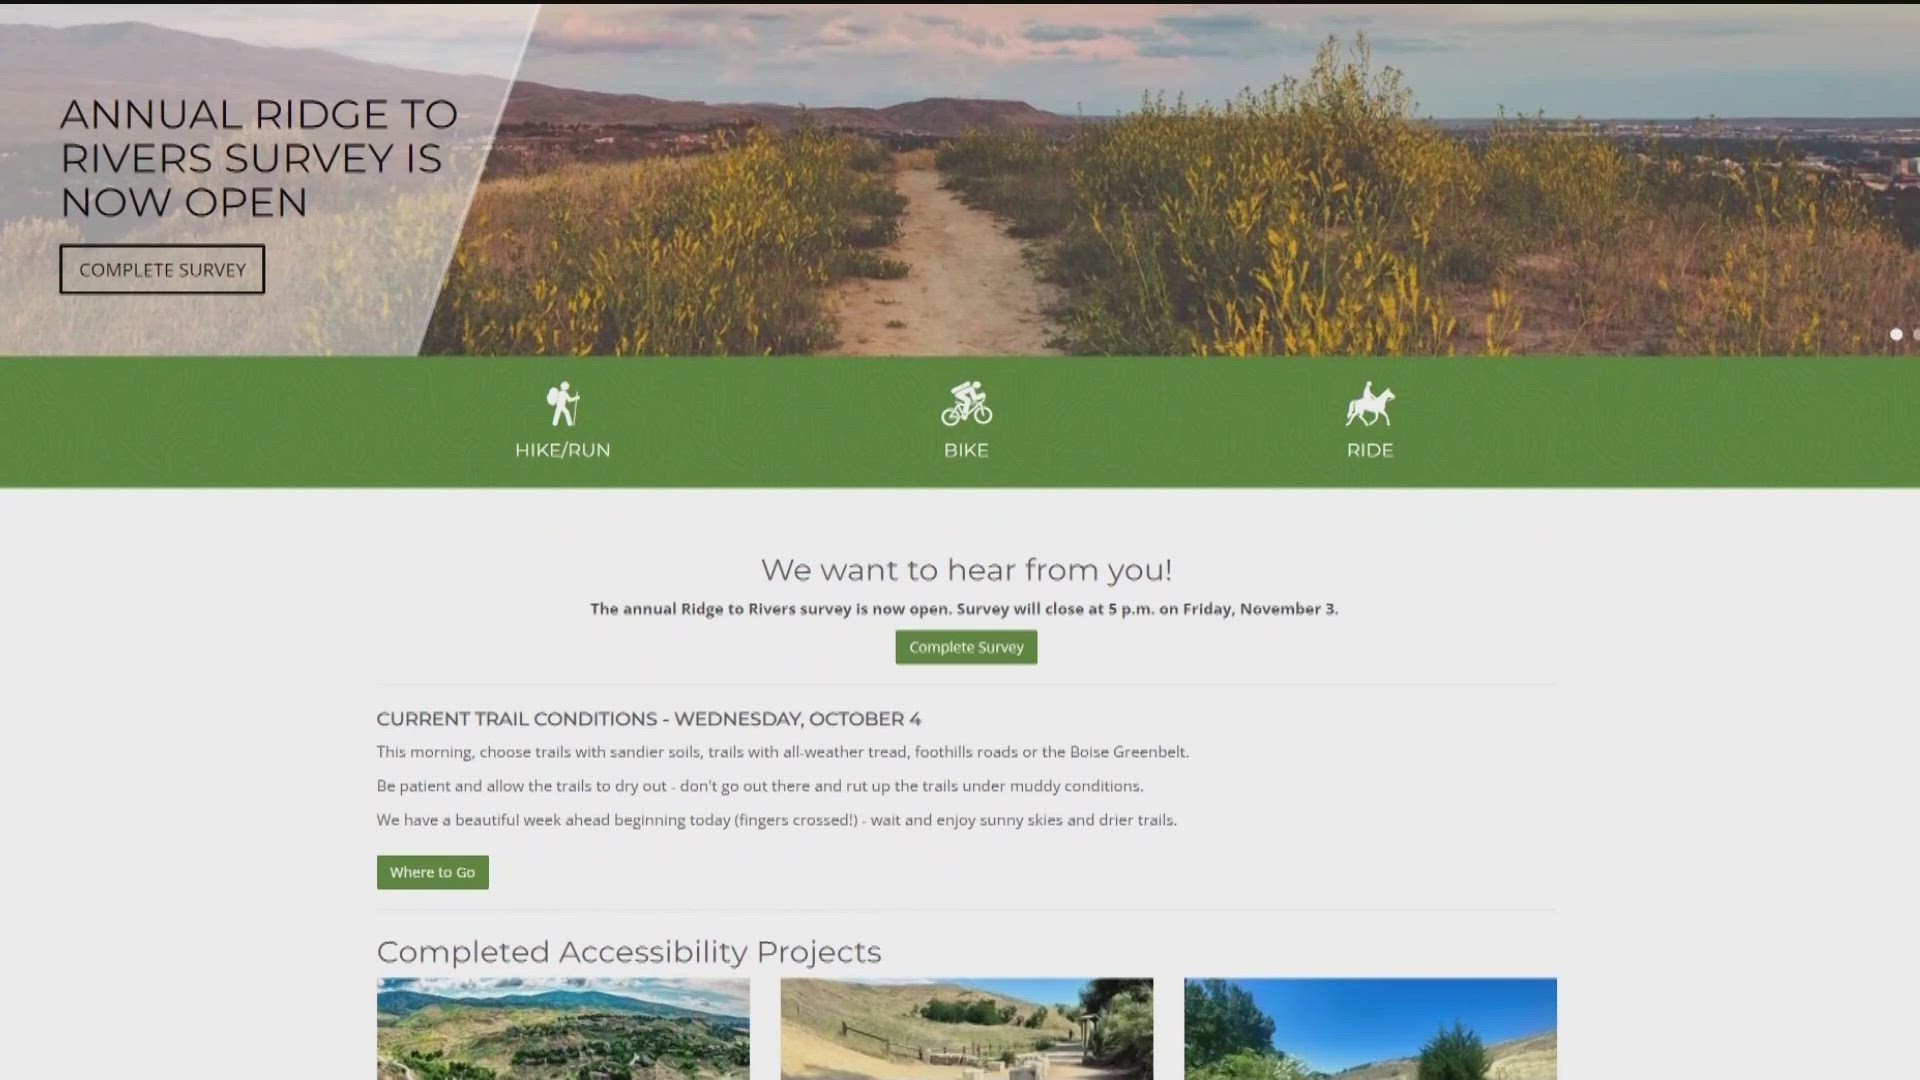 The survey has 15 questions, and organizers will gather feedback to better the foothill trails.